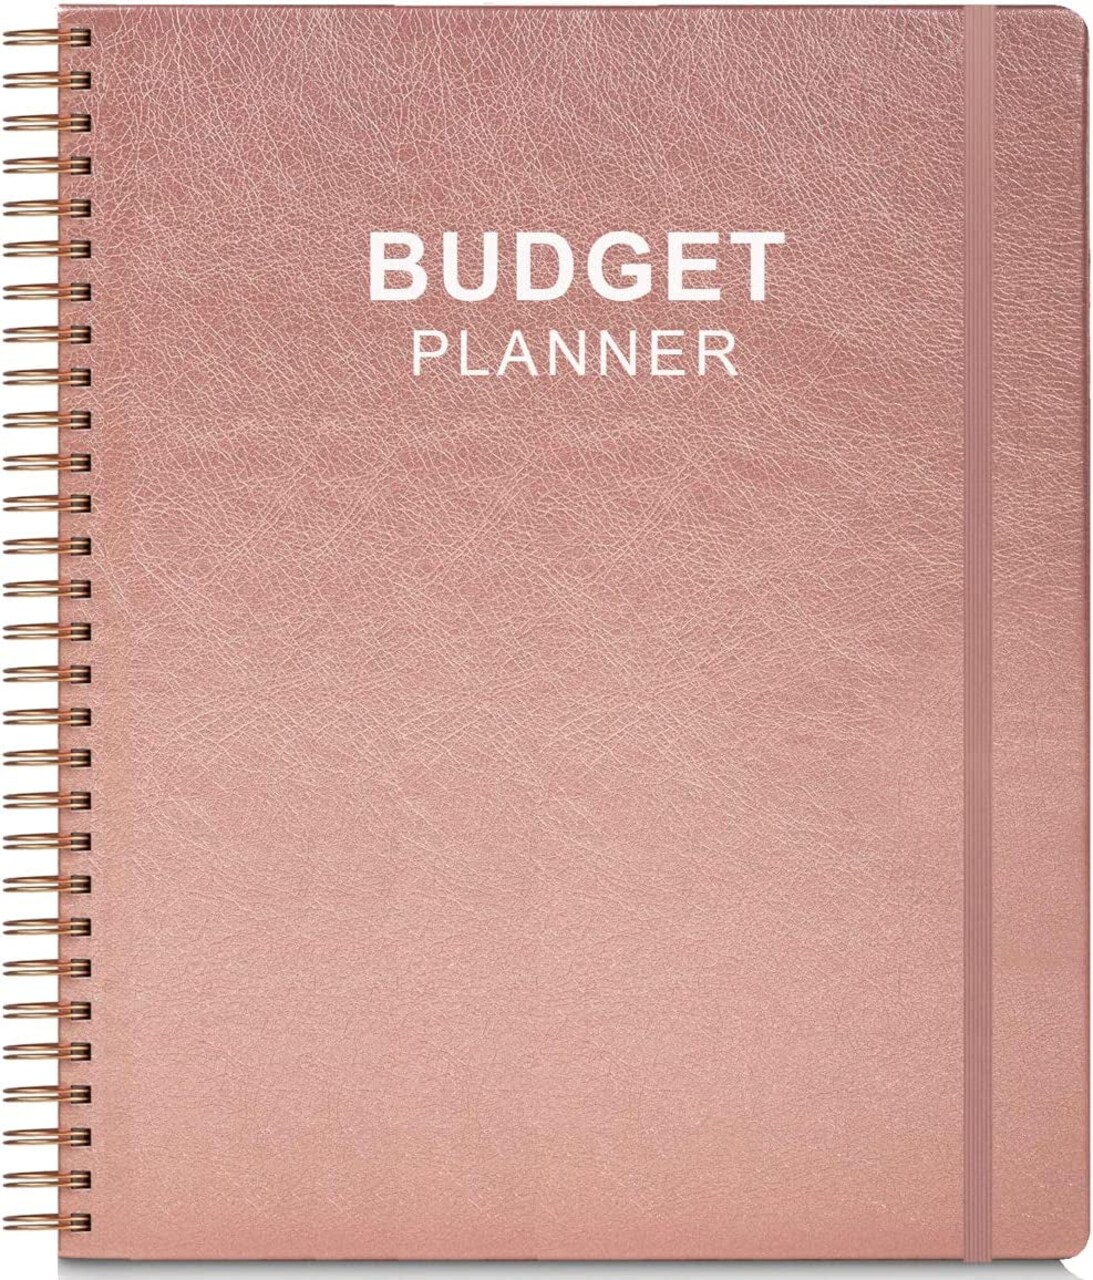 Budget Planner - Monthly Finance Organizer with Expense Tracker Notebook to  Manage Your Money Effectively, Undated Finance Planner/Account Book, Start  Anytime, 1 Year Use, A5, Rose